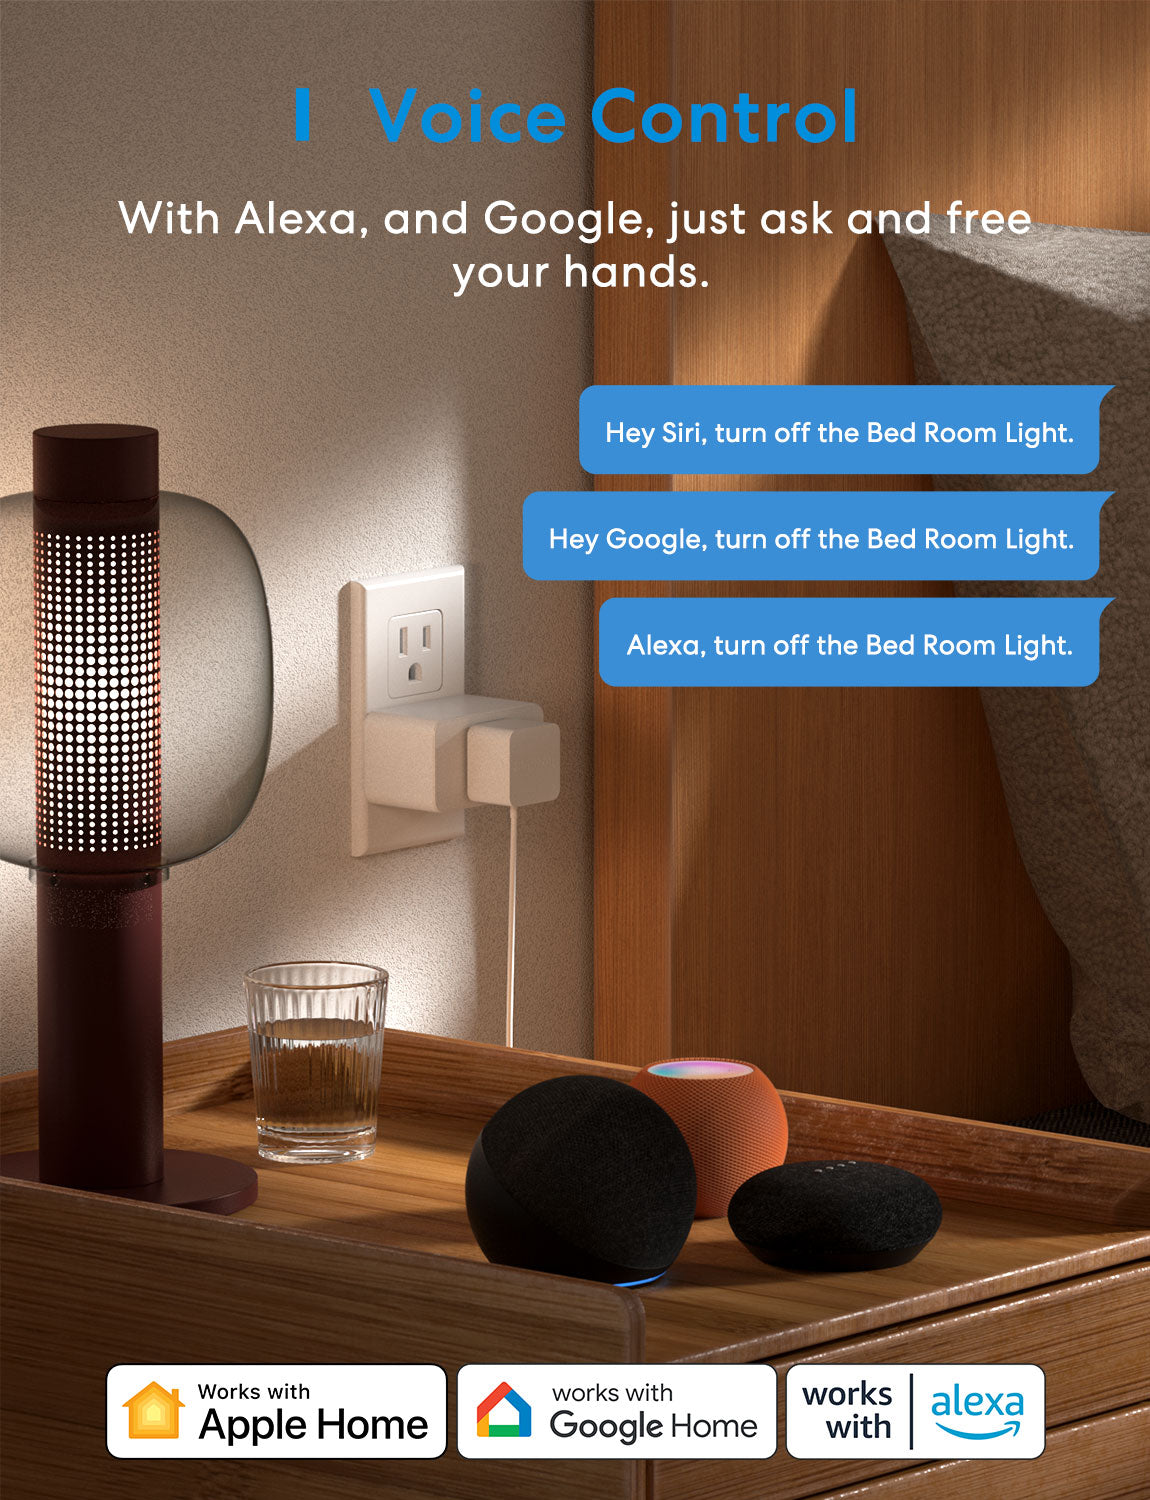 Hot Deal: 2-Pack RGB Smart Bulbs With Alexa, Google Assistant IFTTT Support  For Just $19.99